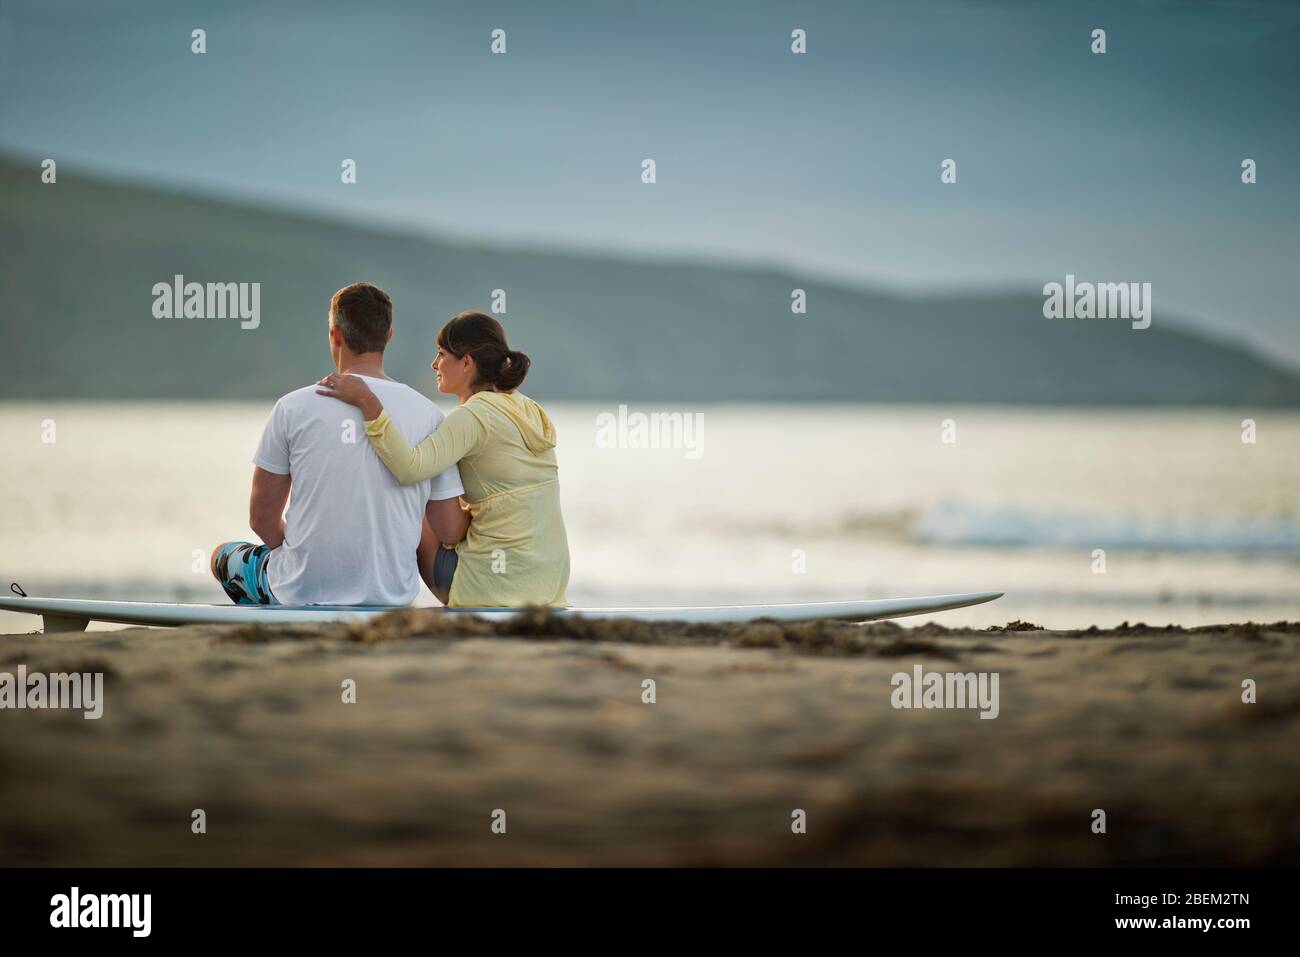 Mid adult couple sitting on a surfboard at the beach Stock Photo